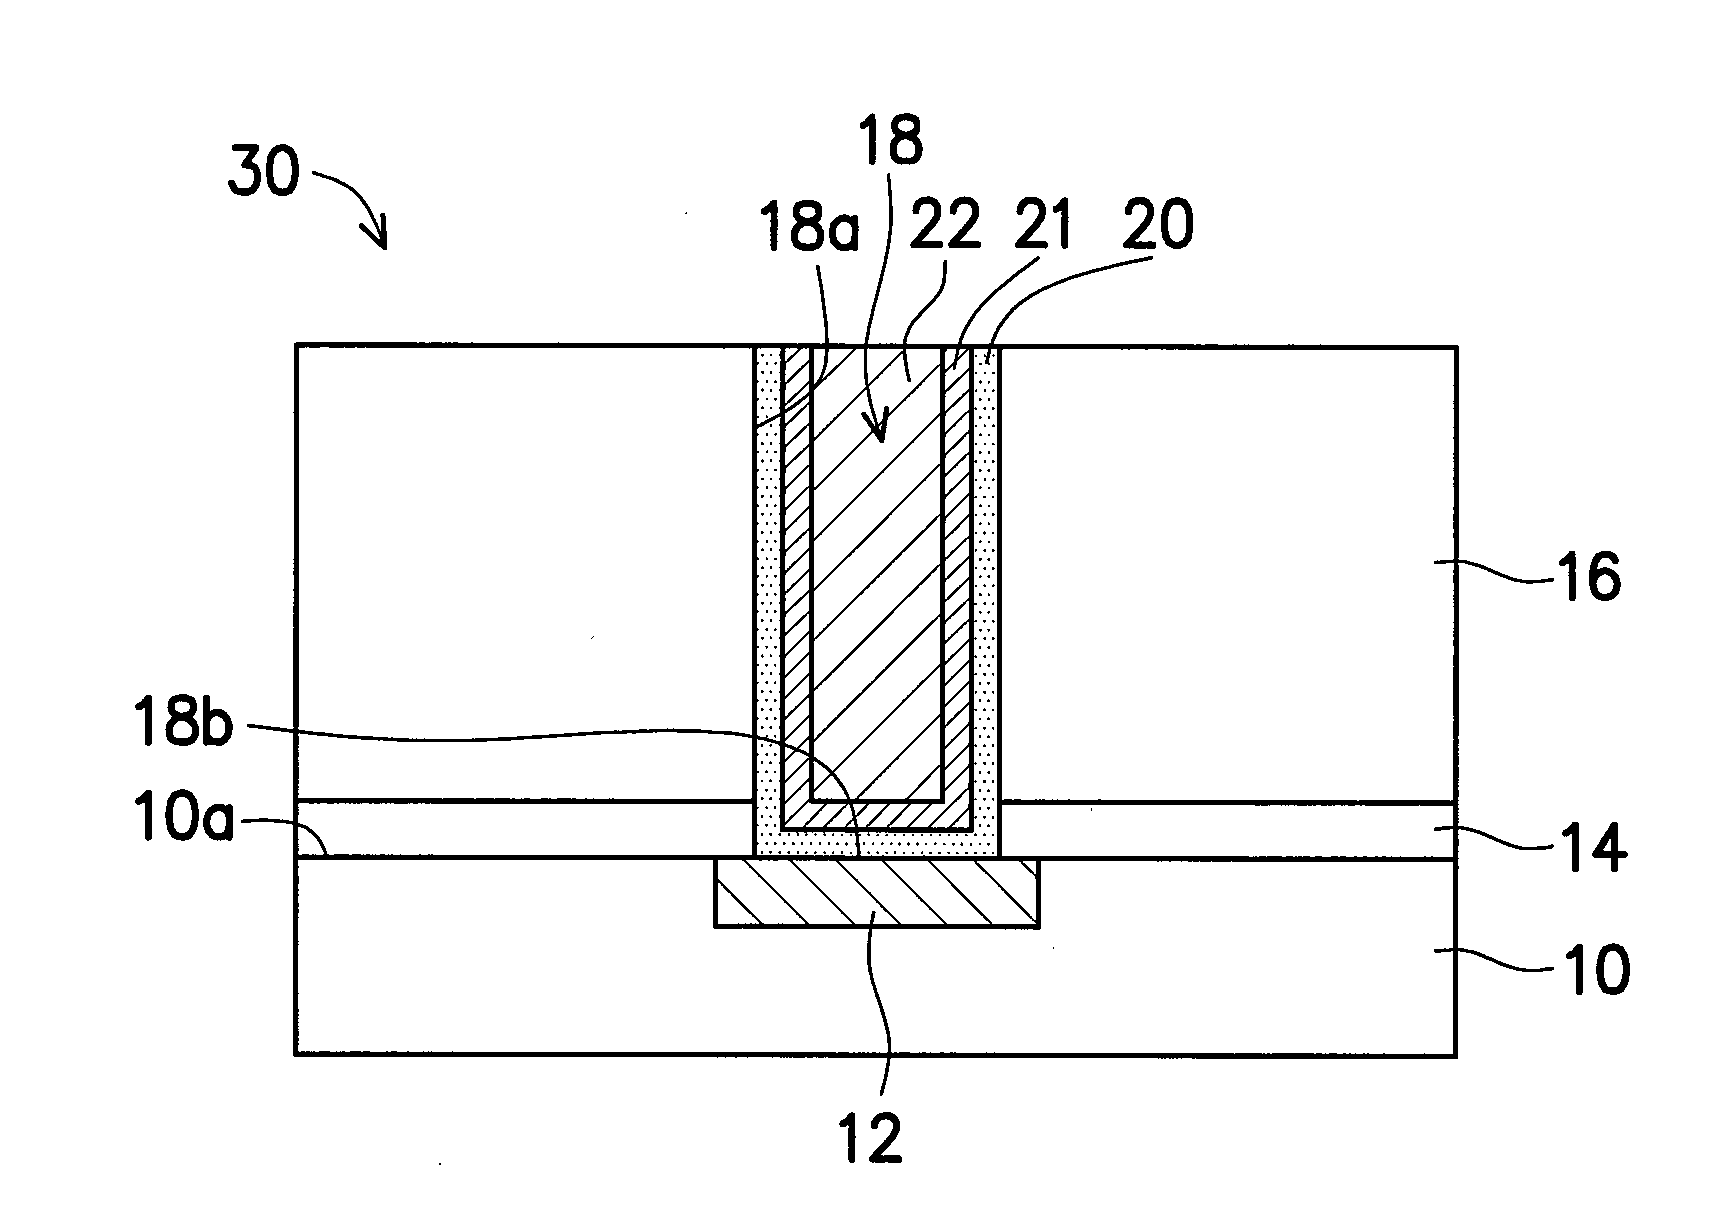 Single metal damascene structure and method of forming the same